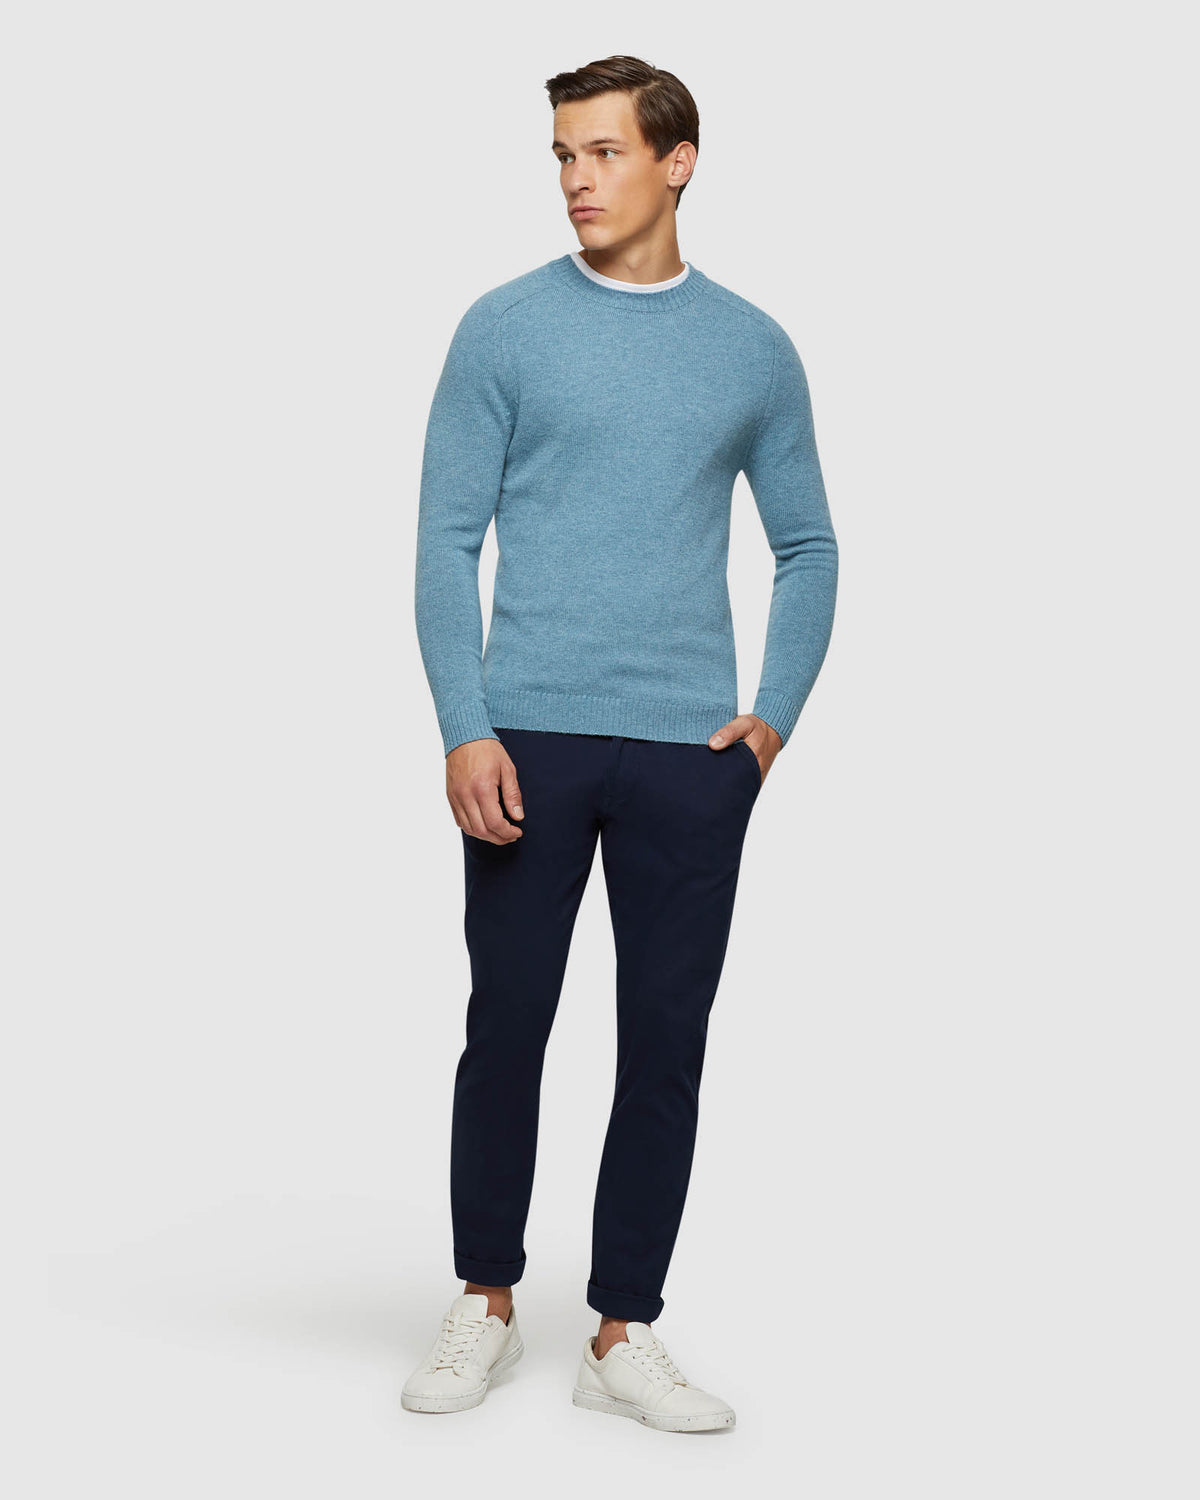 RITCHIE CREW NECK LAMBSWOOL KNIT MENS KNITWEAR